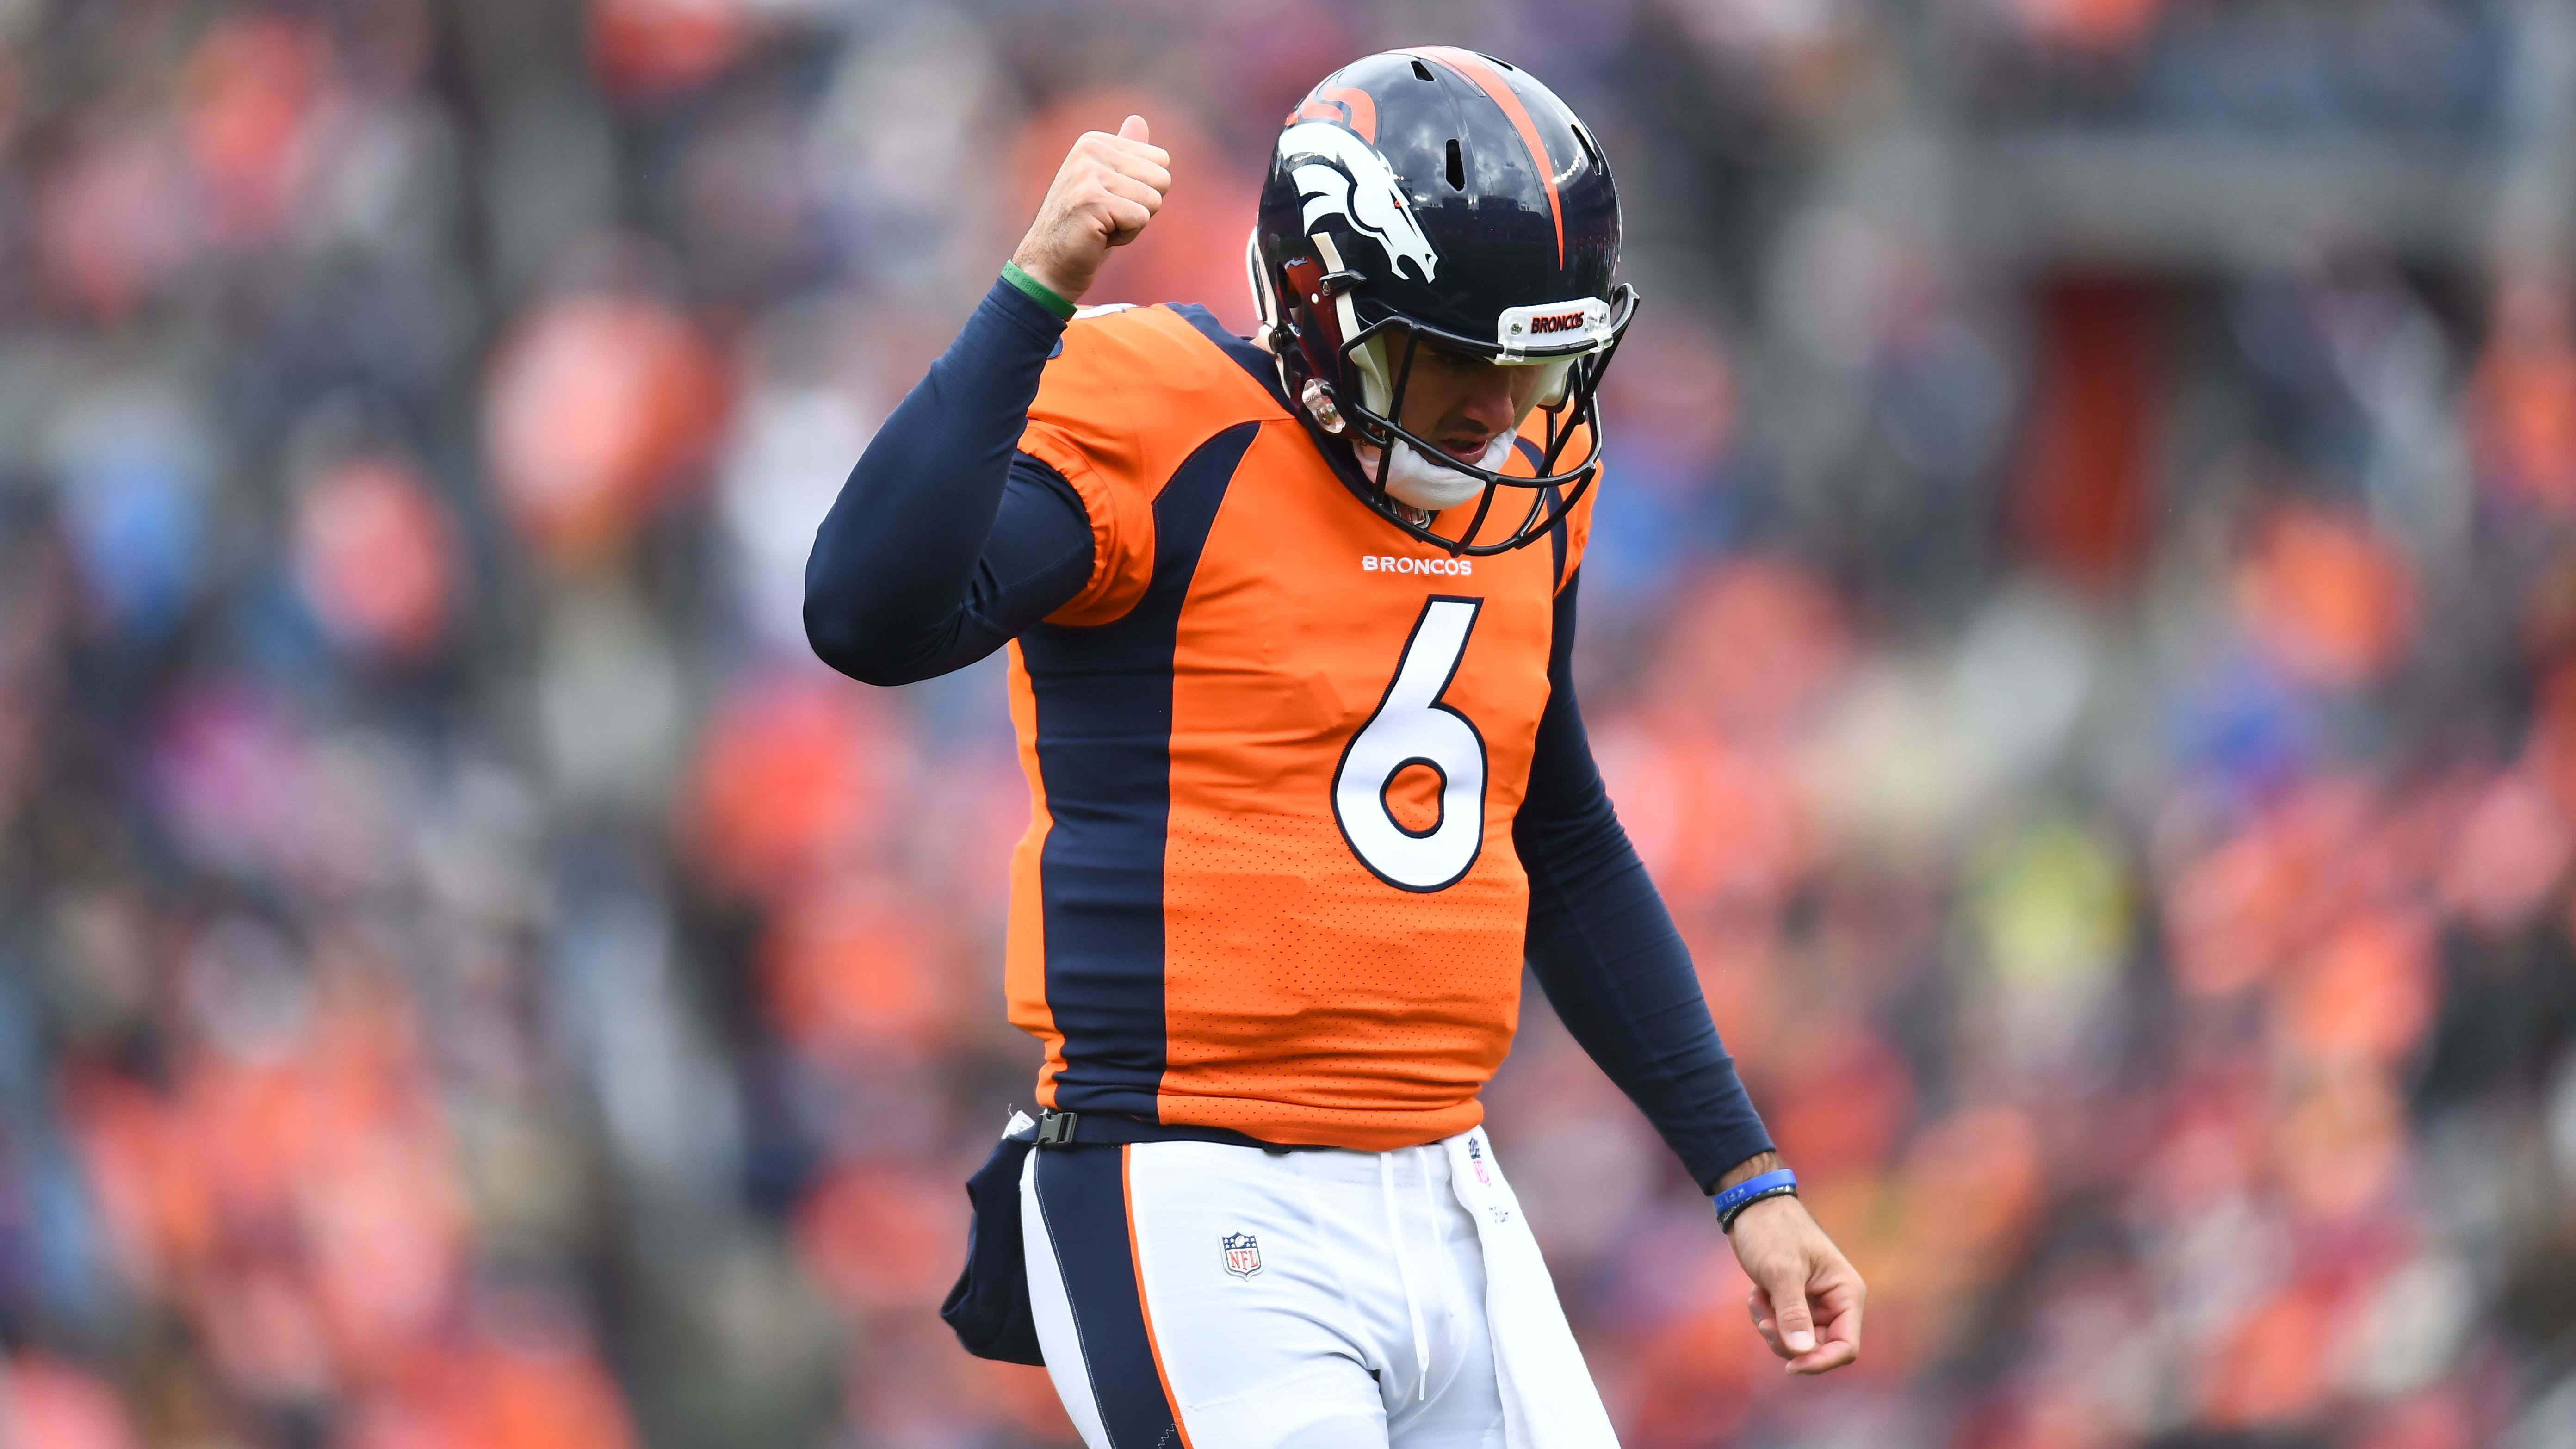 Ex-Broncos QB Chad Kelly is in Big Trouble Once Again